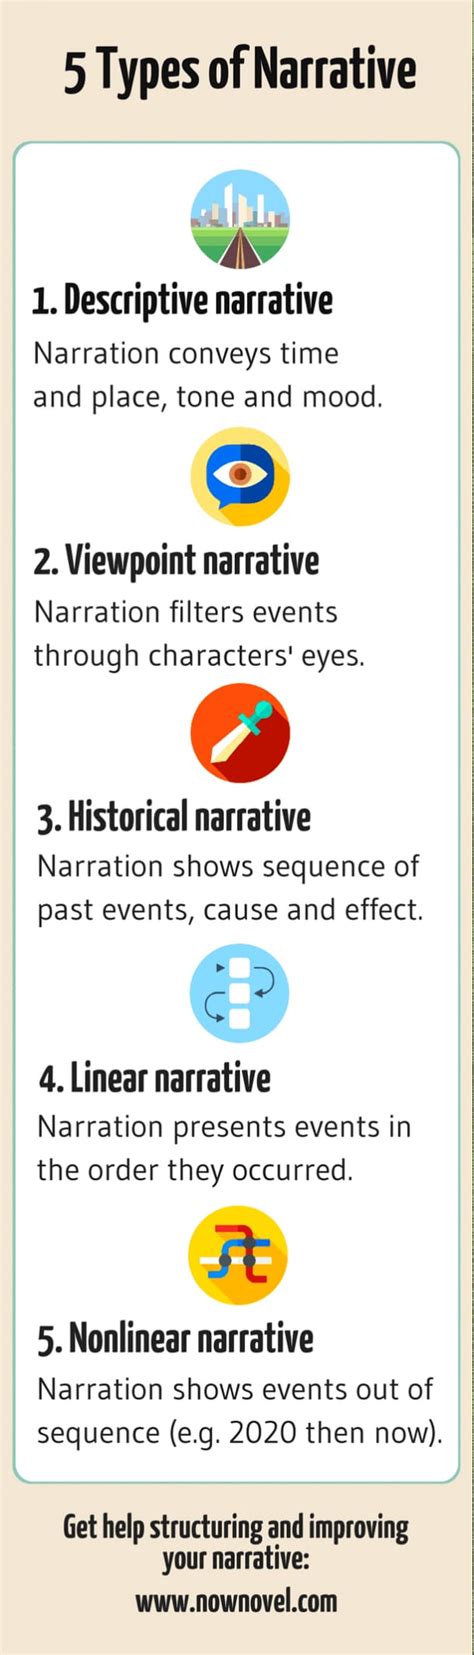 What are the two main types of narrative?